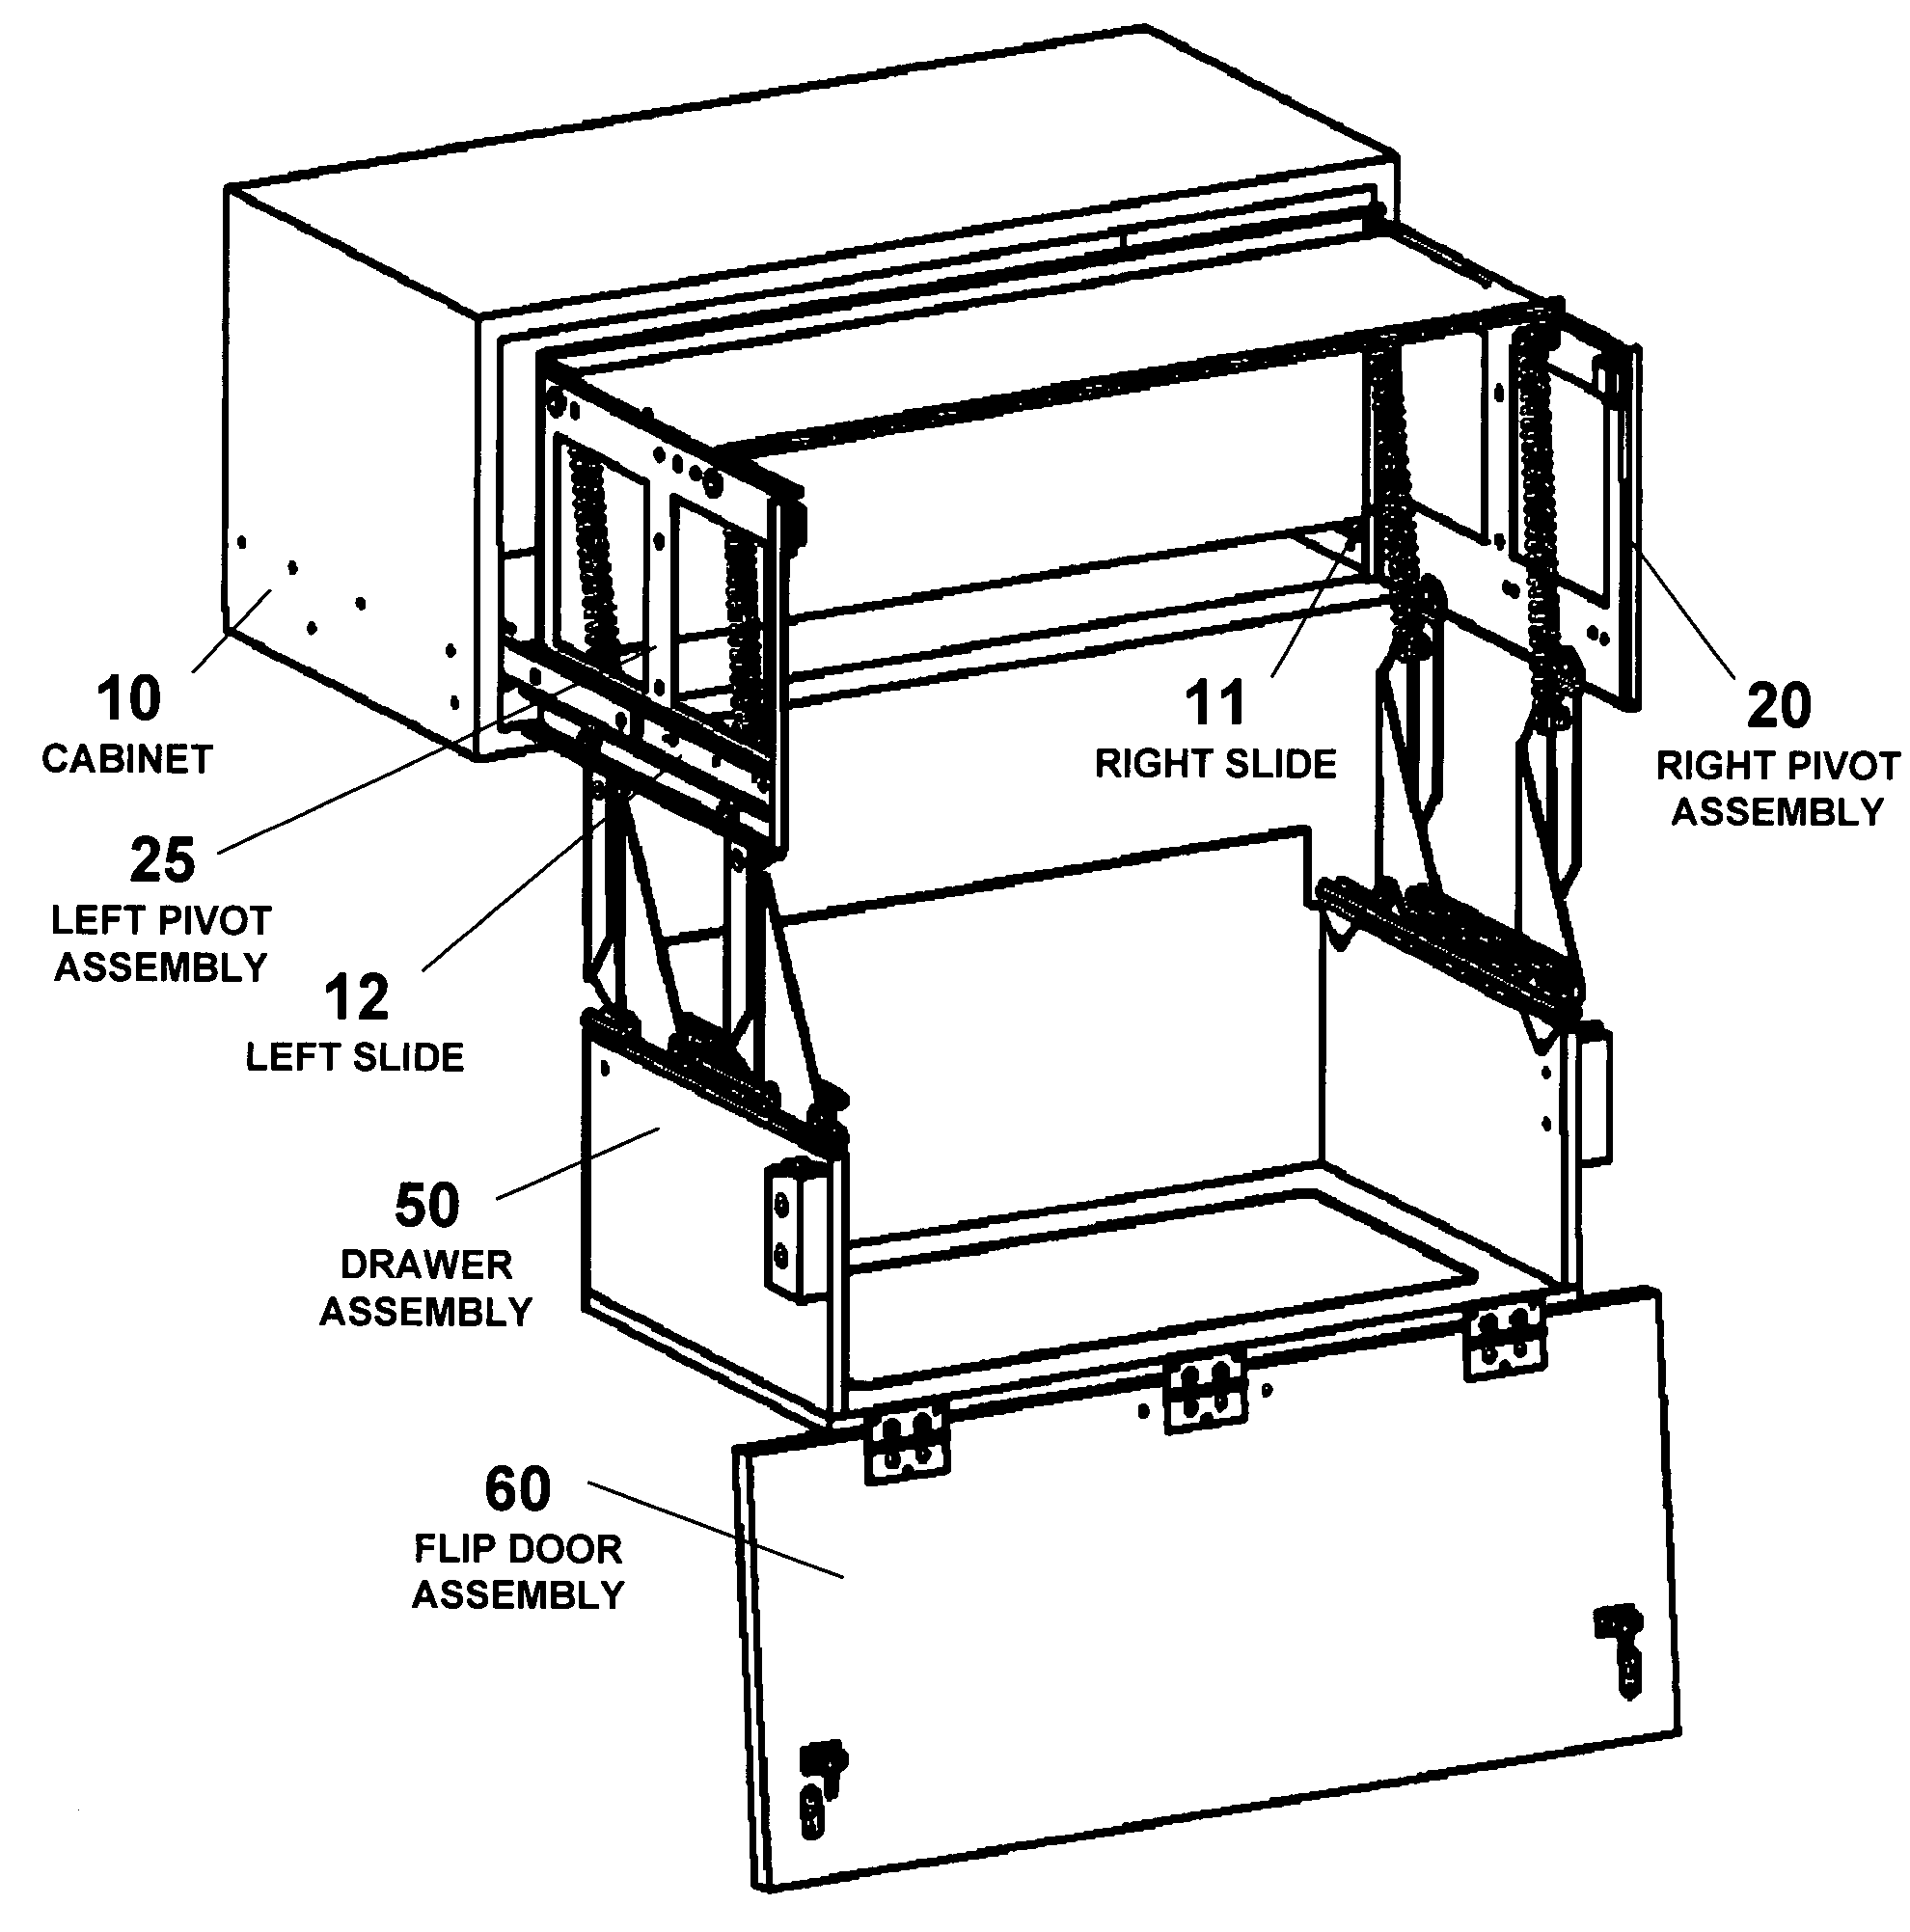 Overhead pull-out swing-down drawer